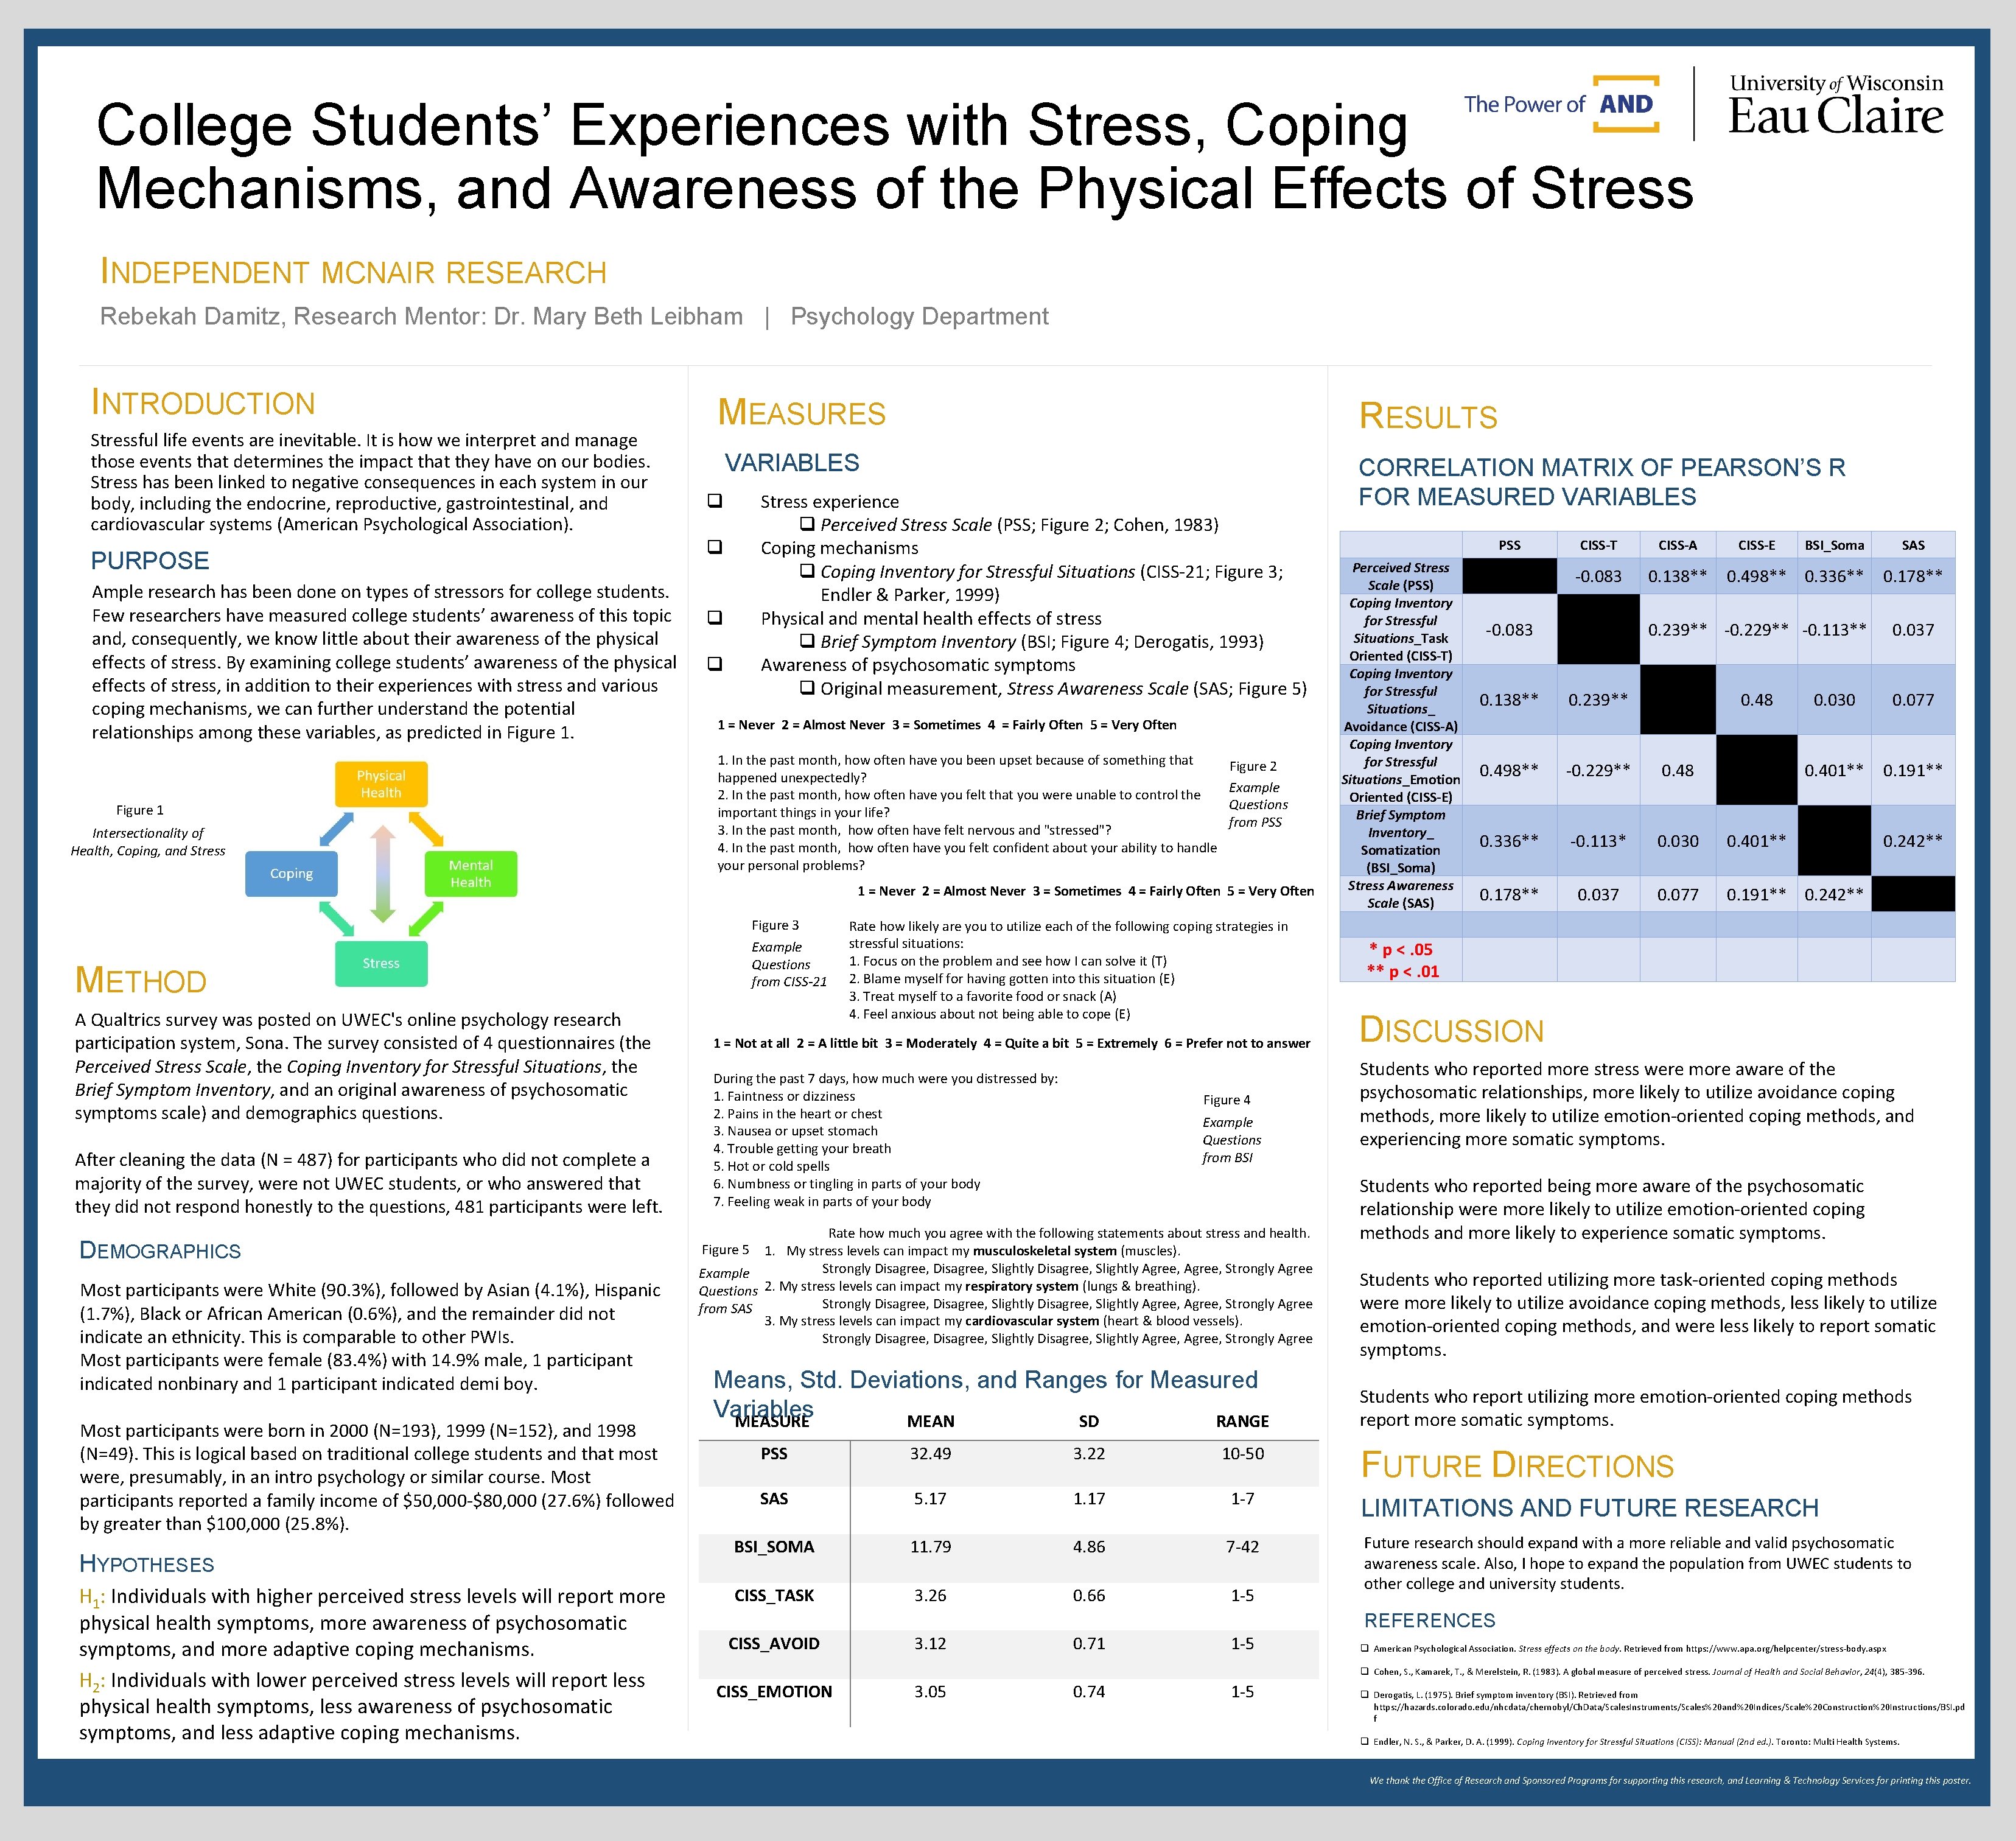 College Students’ Experiences with Stress, Coping Mechanisms, and Awareness of the Physical Effects of